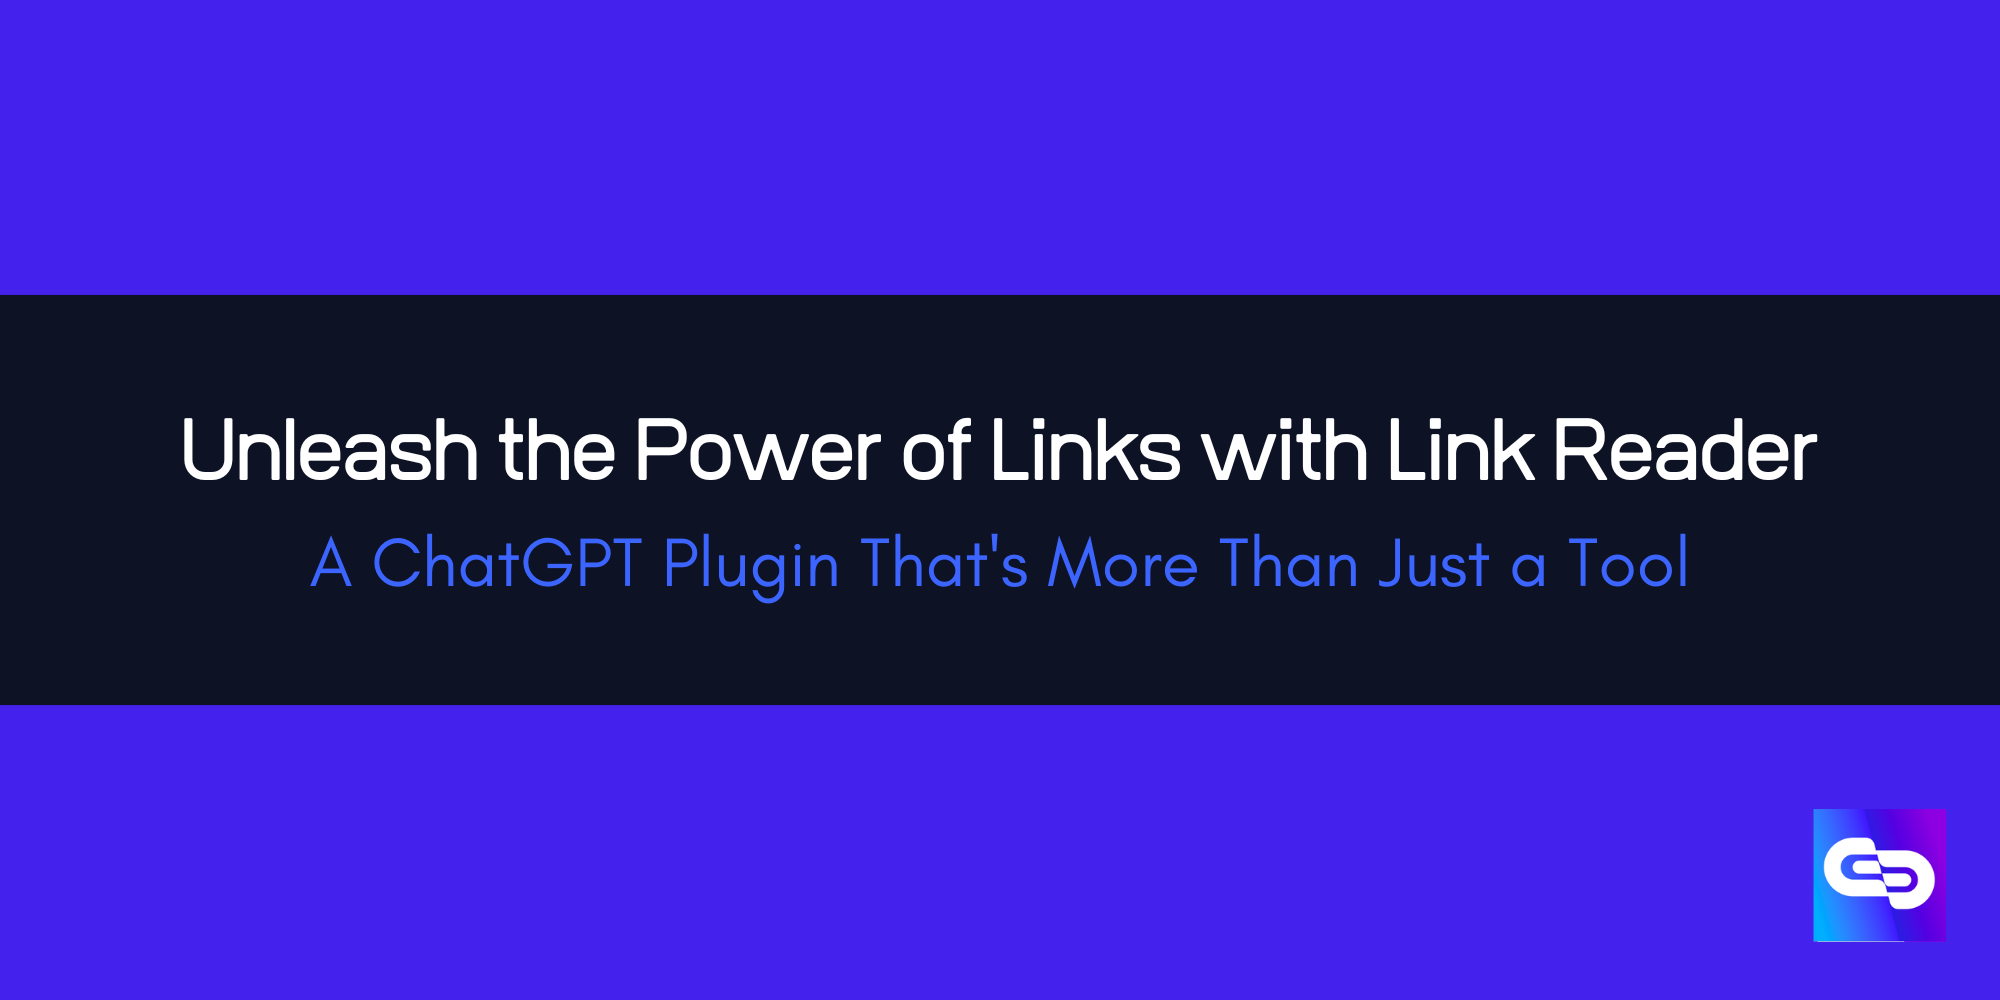 Unleashing the Power of Links with Link Reader: A ChatGPT Plugin That's More Than Just a Tool